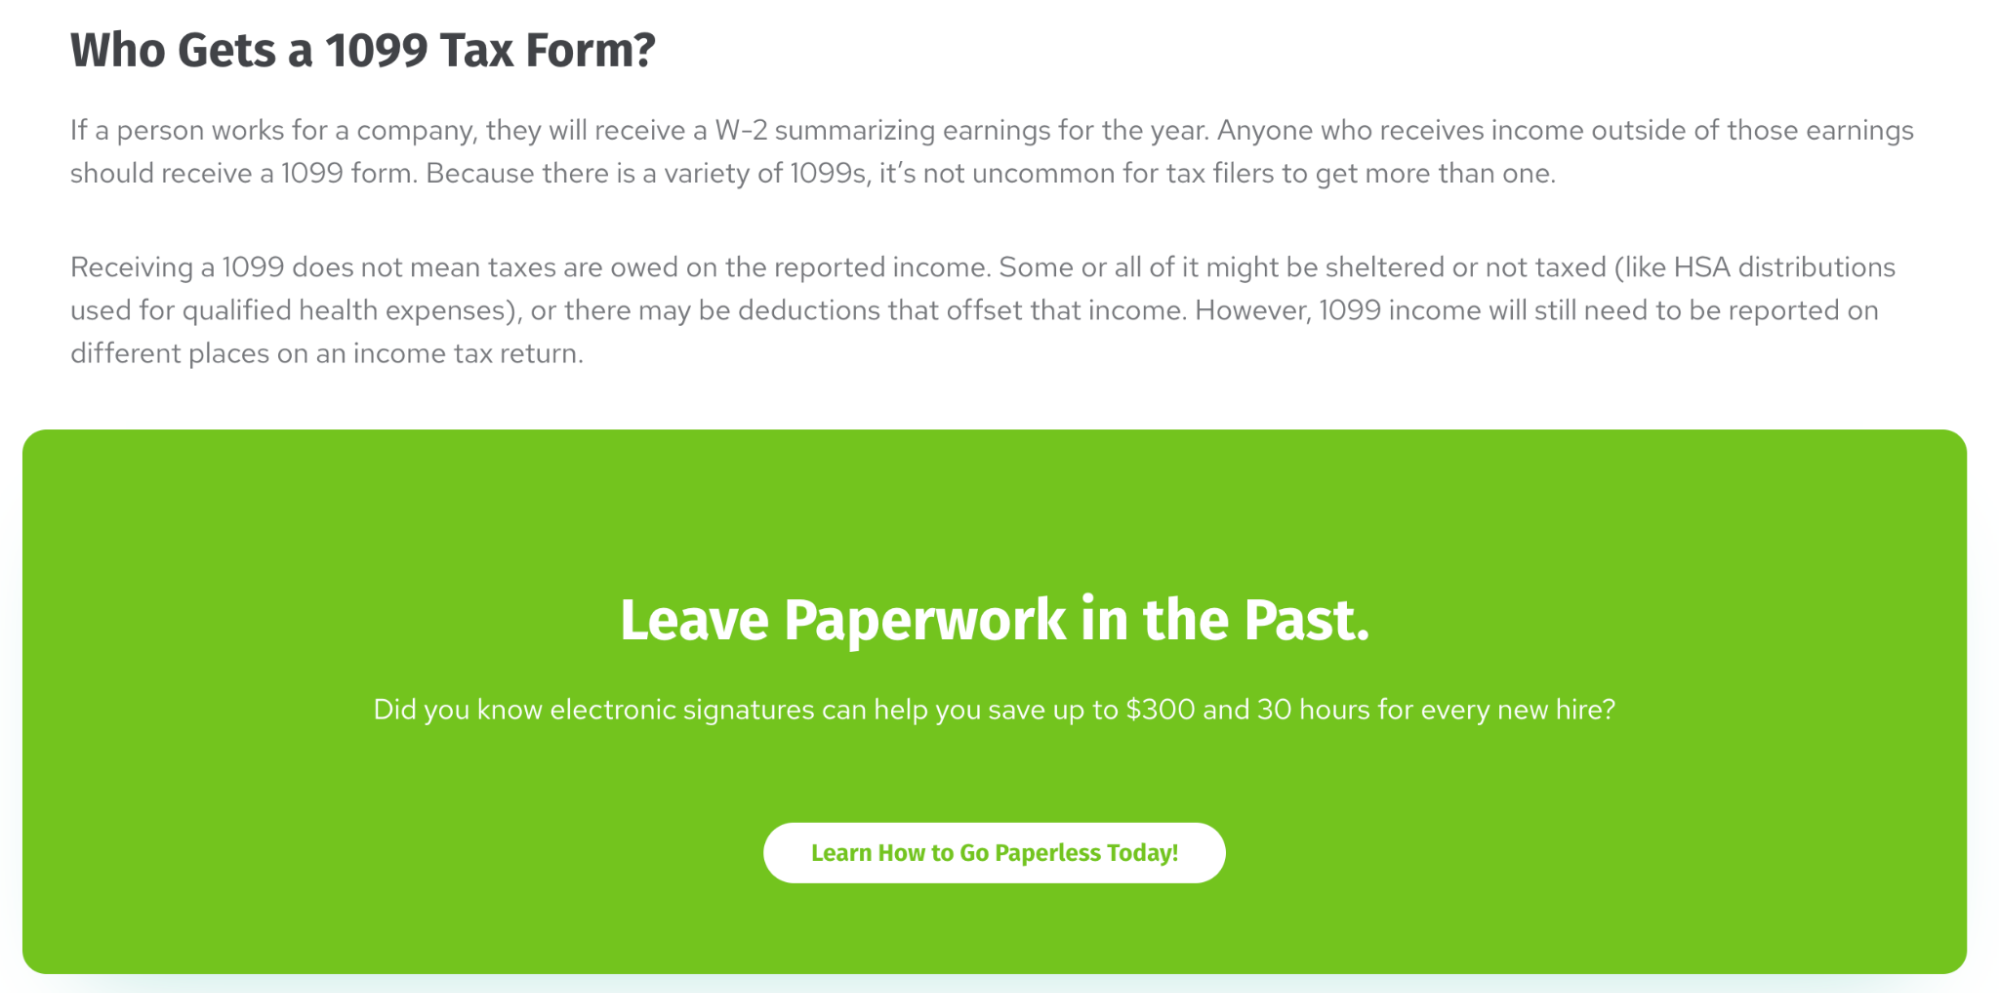 Leave Paperwork In the Past